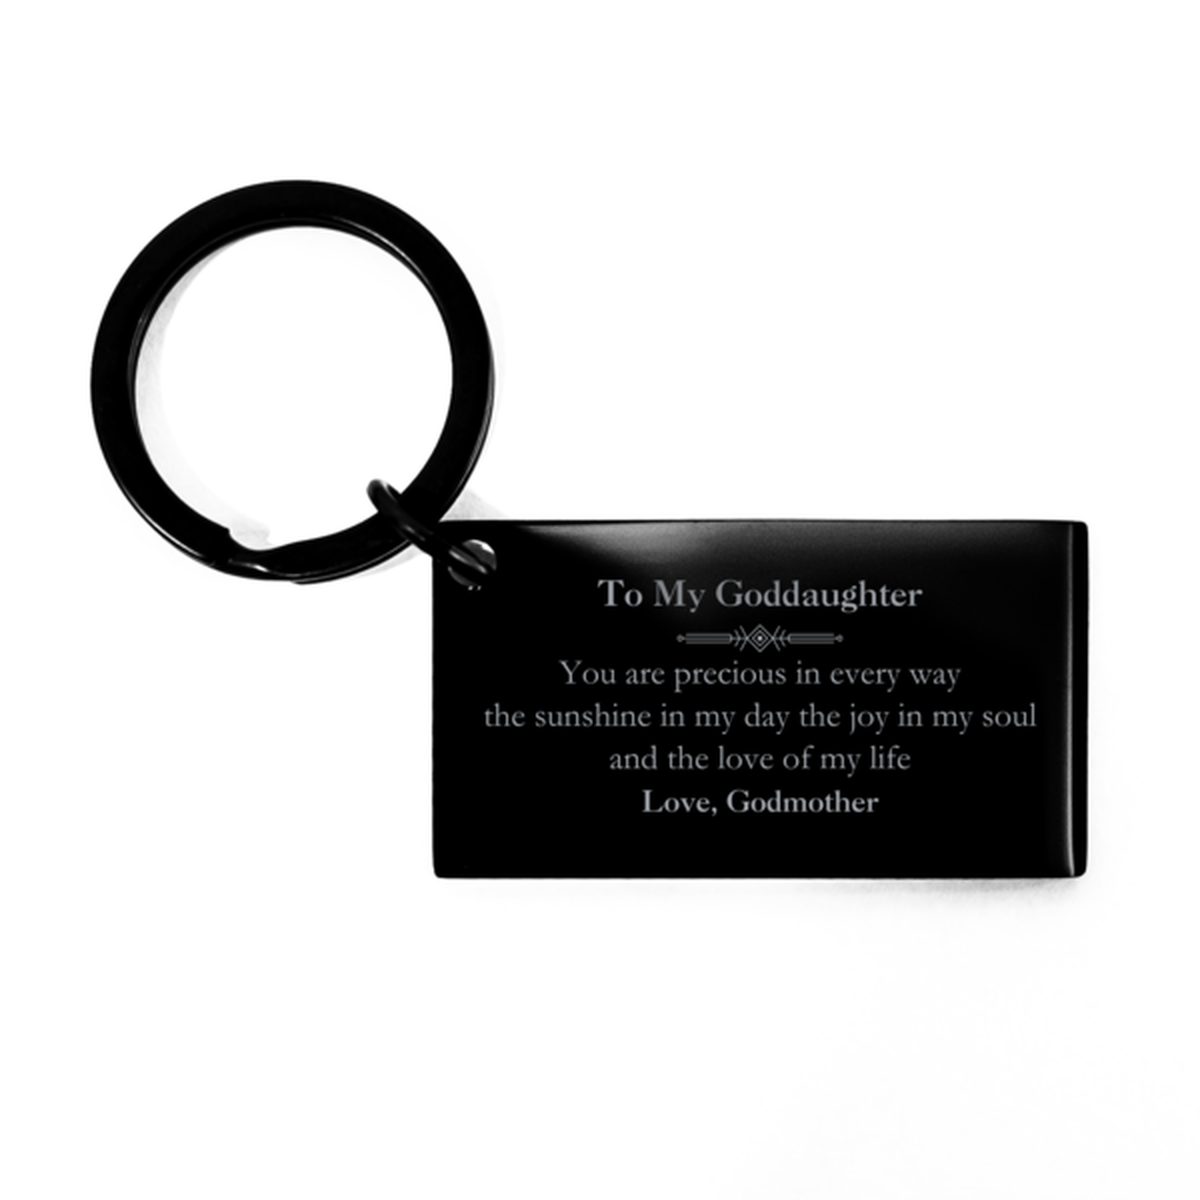 Graduation Gifts for Goddaughter Keychain Present from Godmother, Christmas Goddaughter Birthday Gifts Goddaughter You are precious in every way the sunshine in my day. Love, Godmother